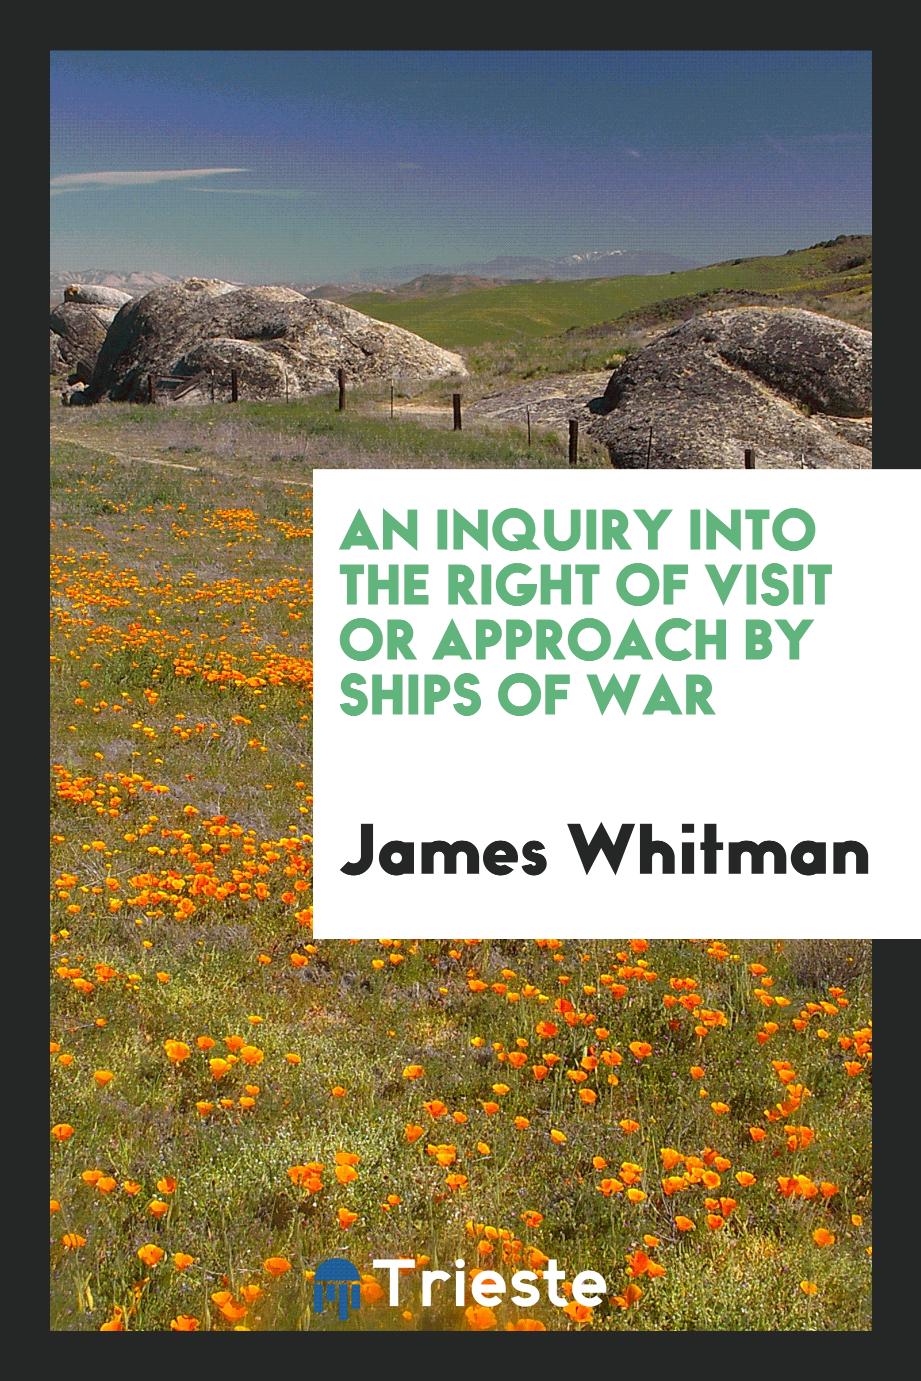 An Inquiry Into the Right of Visit Or Approach by Ships of War